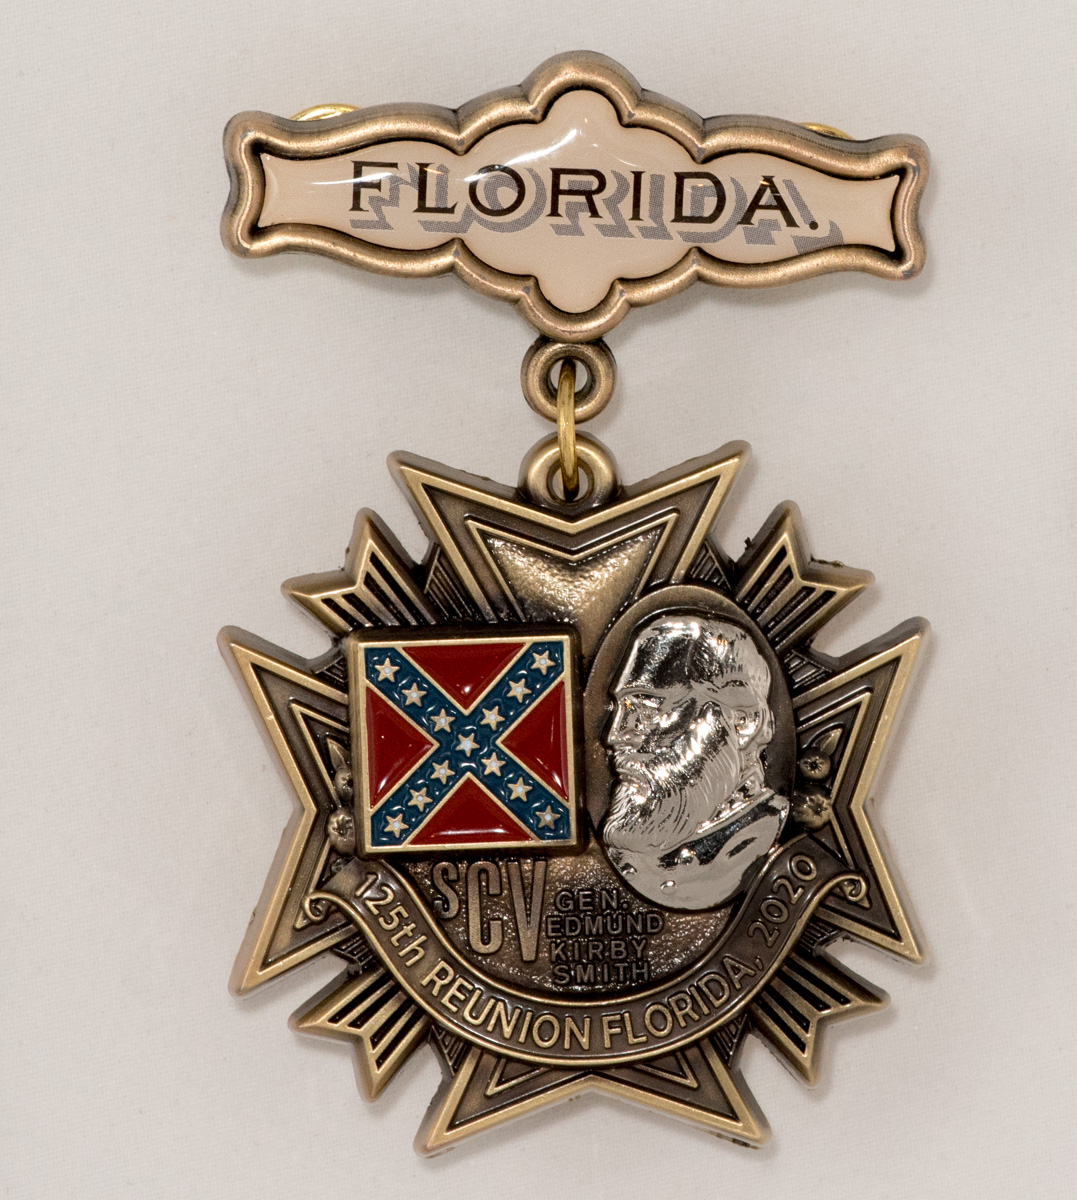 125th National Reunion of the Sons of Confederate Veterans Medal